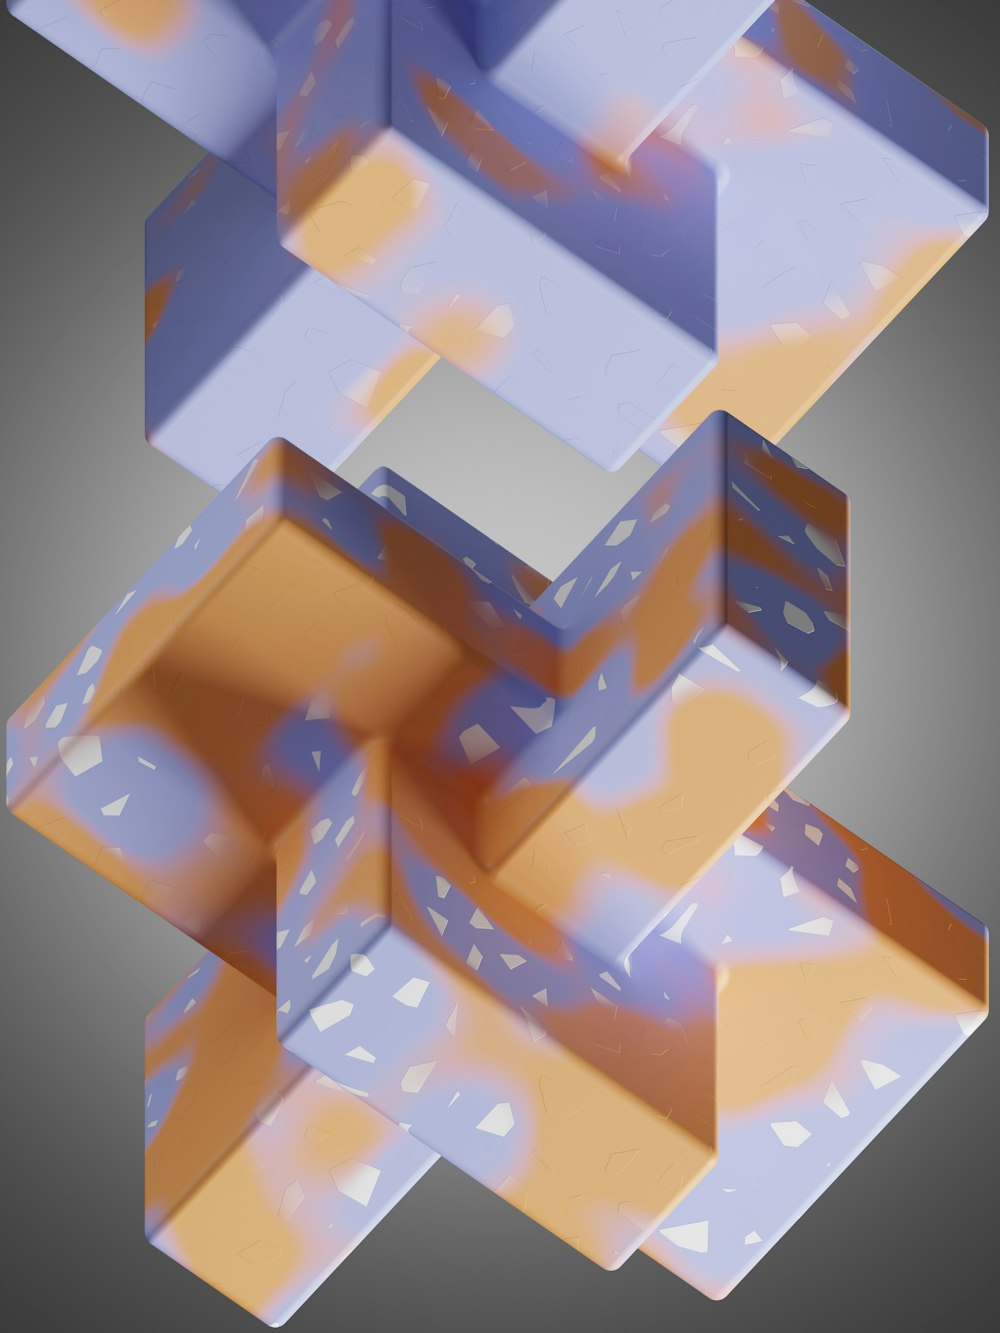 a 3d image of a blue and orange object